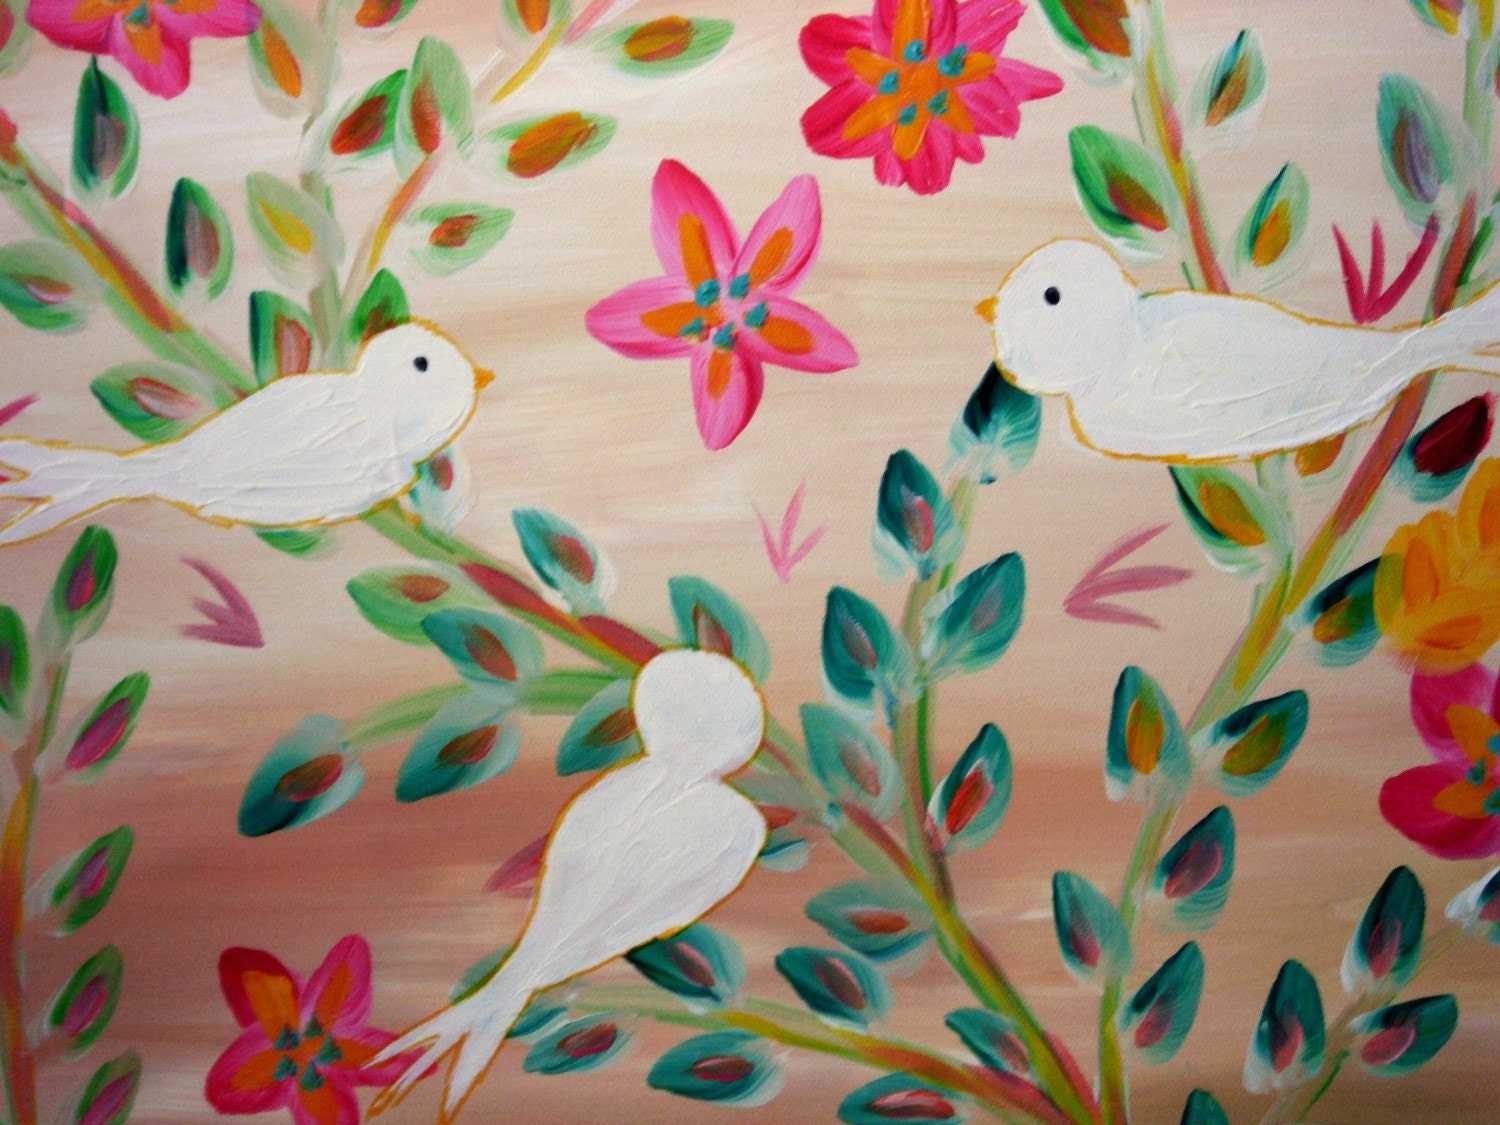 Cyber Monday Etsy Sale Birds and Flowers Original Painting on Canvas 36x24 RESERVED for julilemoncrief4